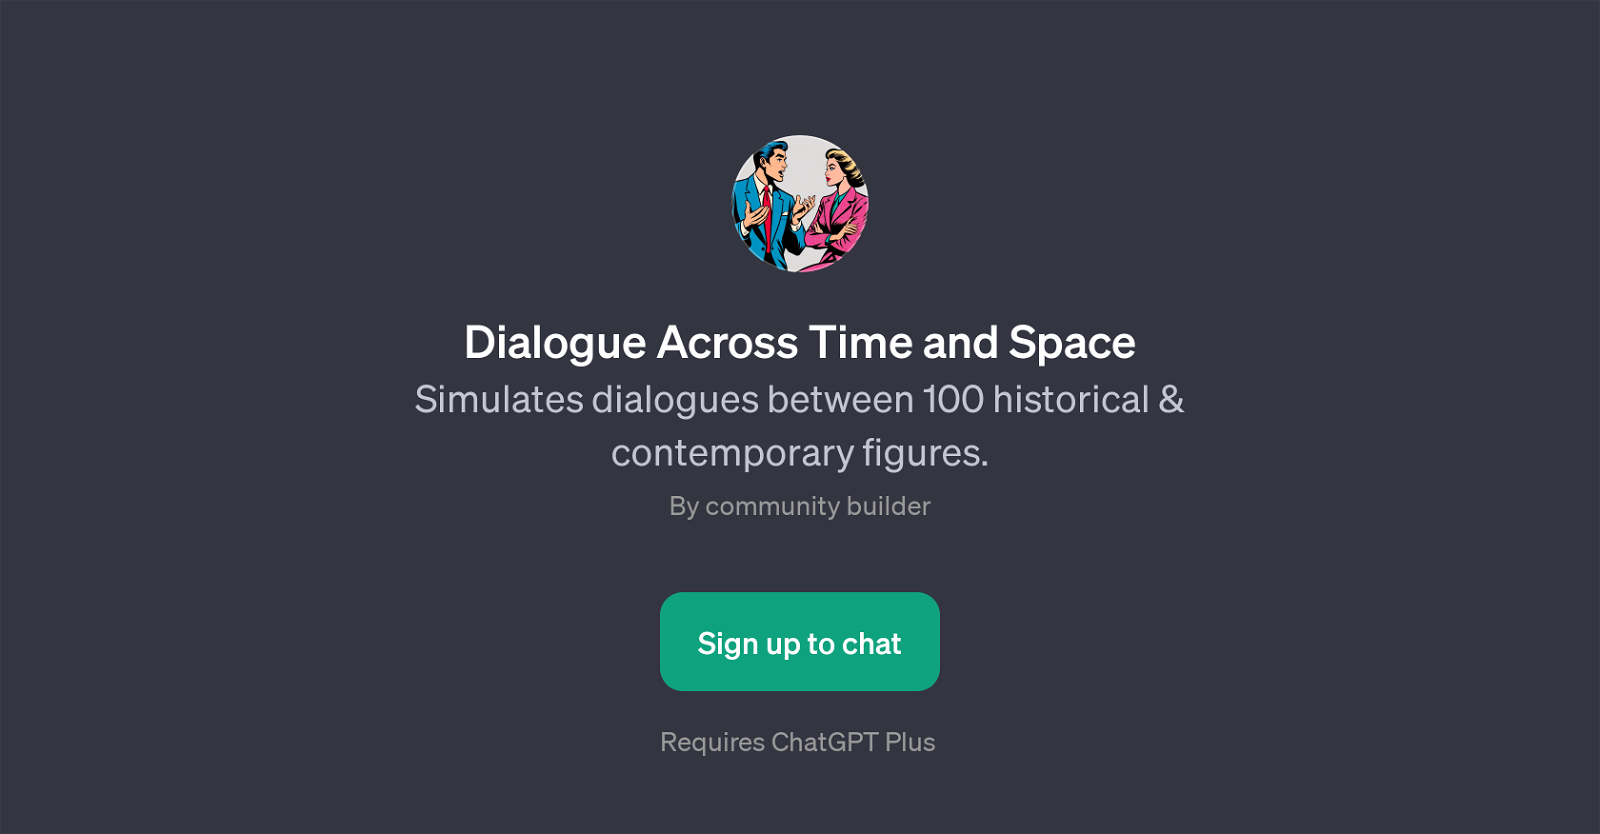 Dialogue Across Time and Space website